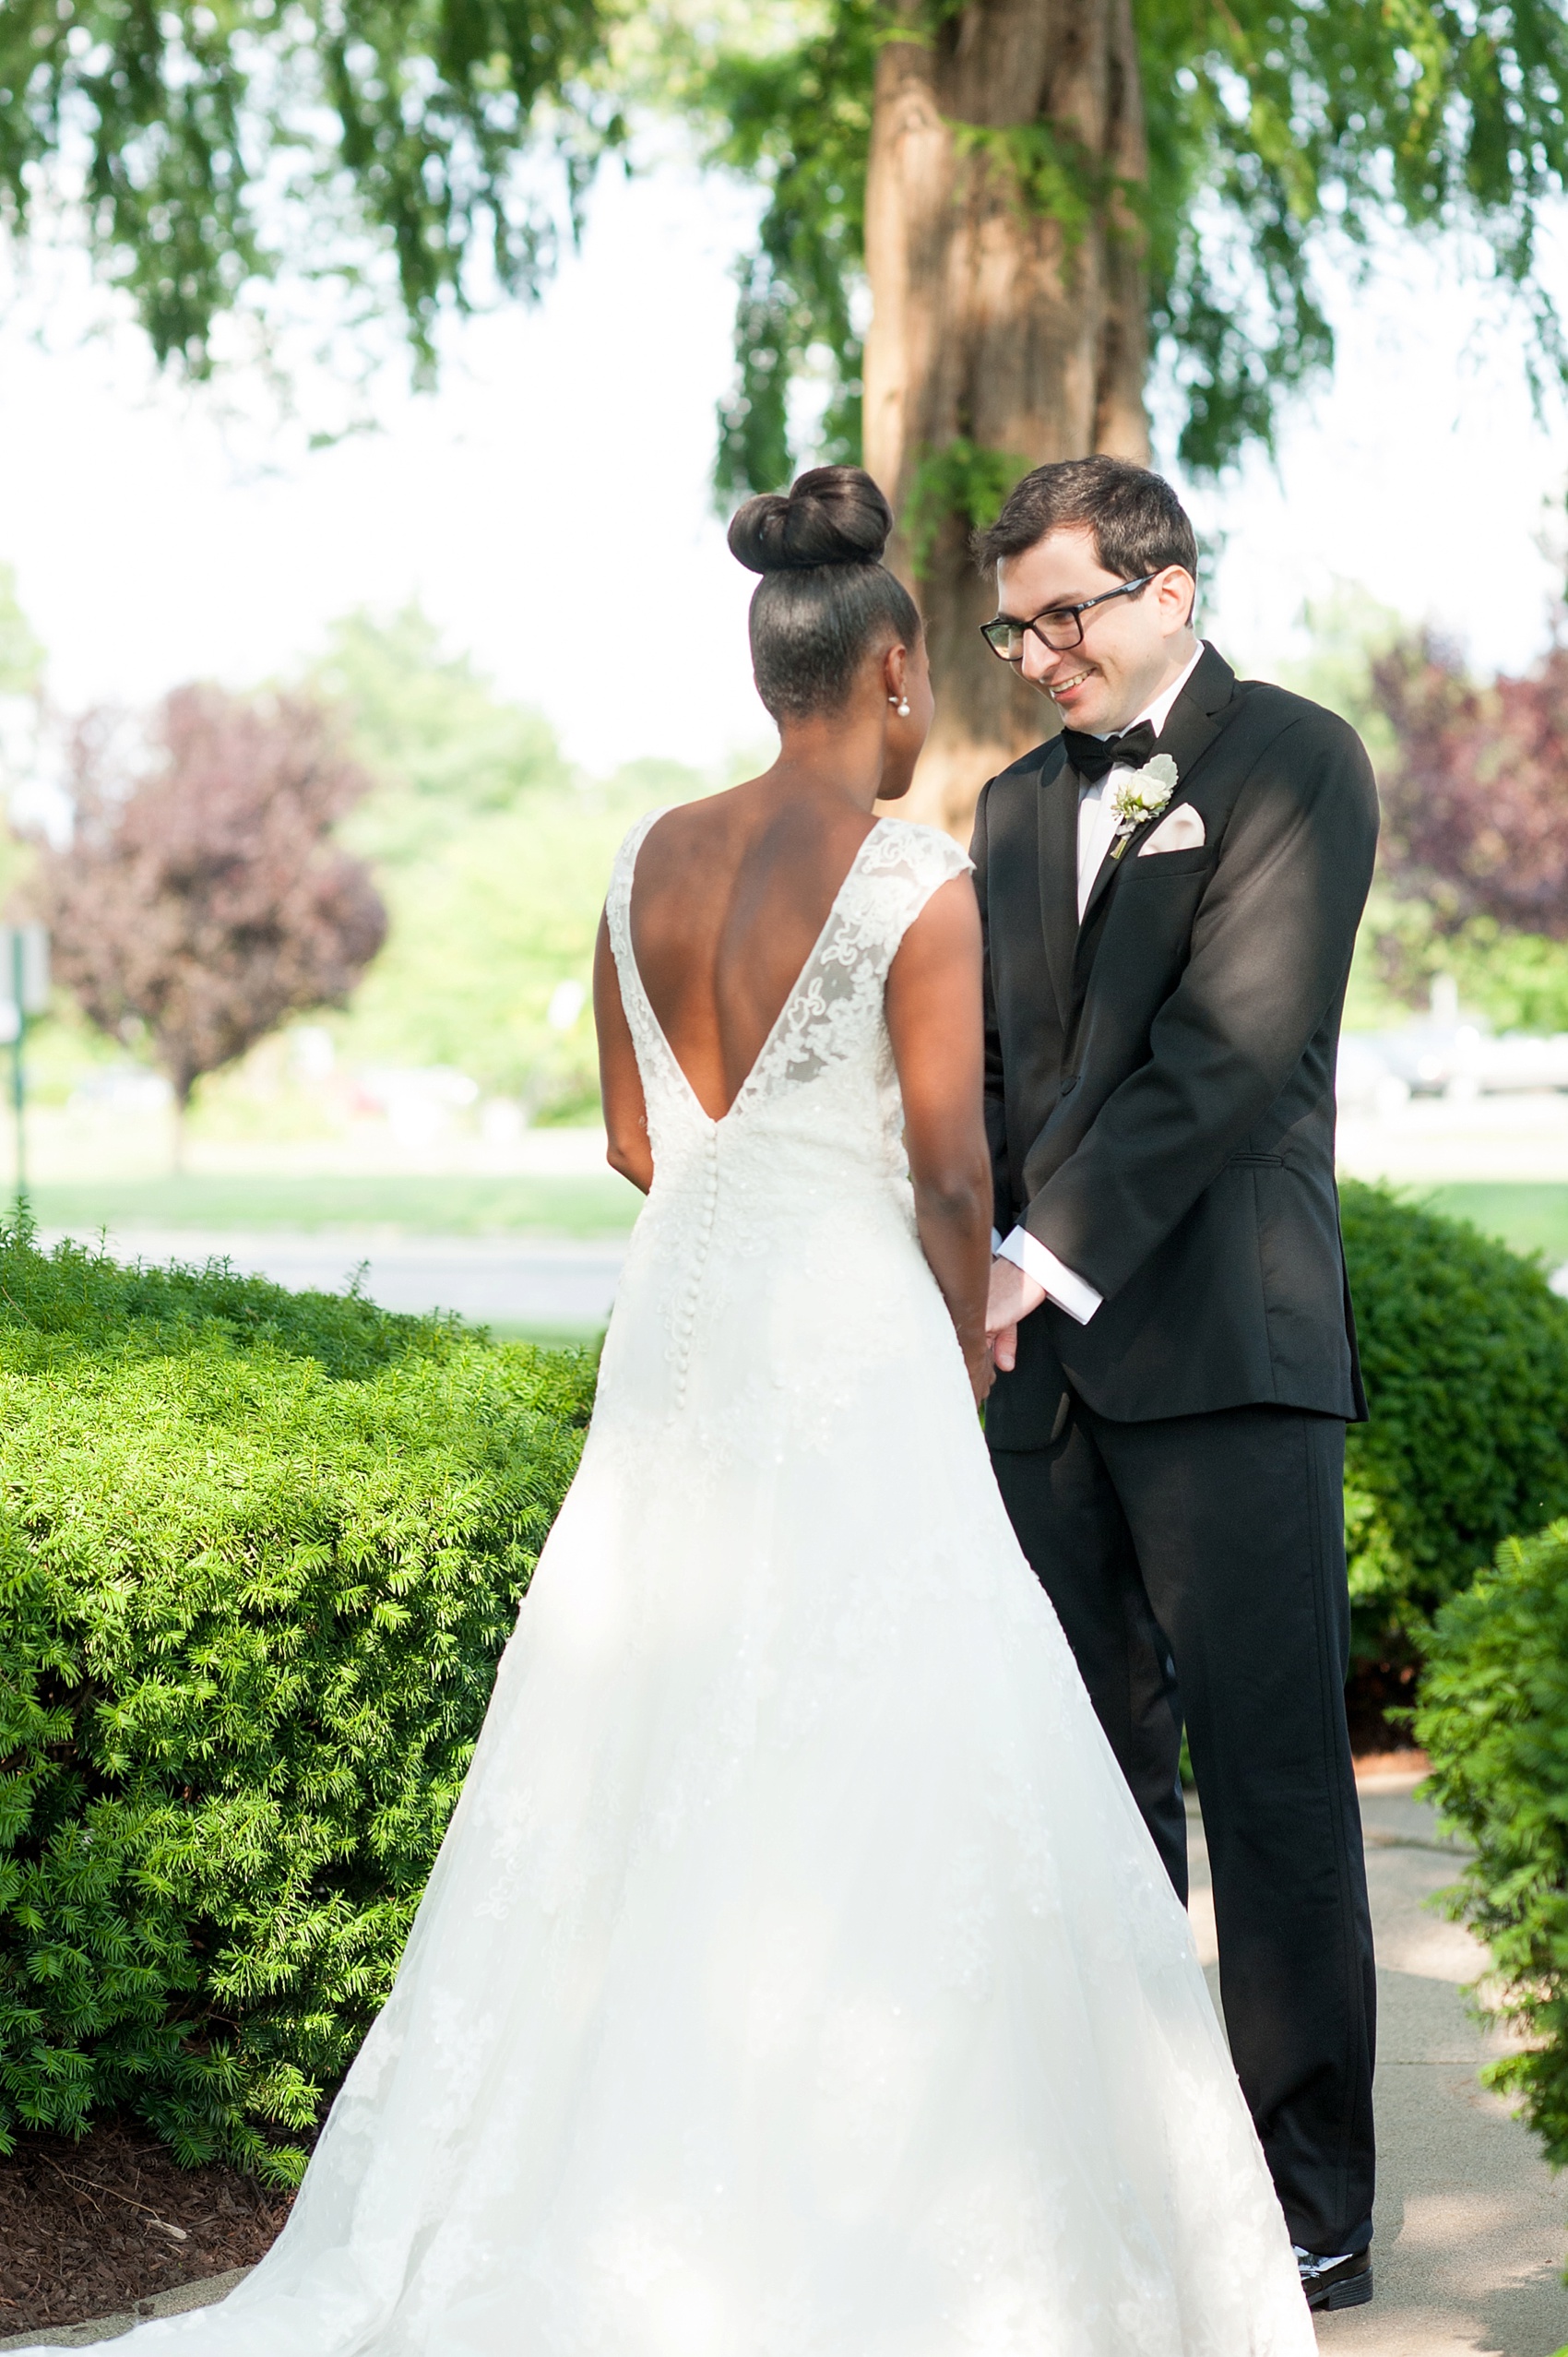 First look! Photos by Mikkel Paige Photography at The Conservatory at the Madison Hotel, New Jersey.